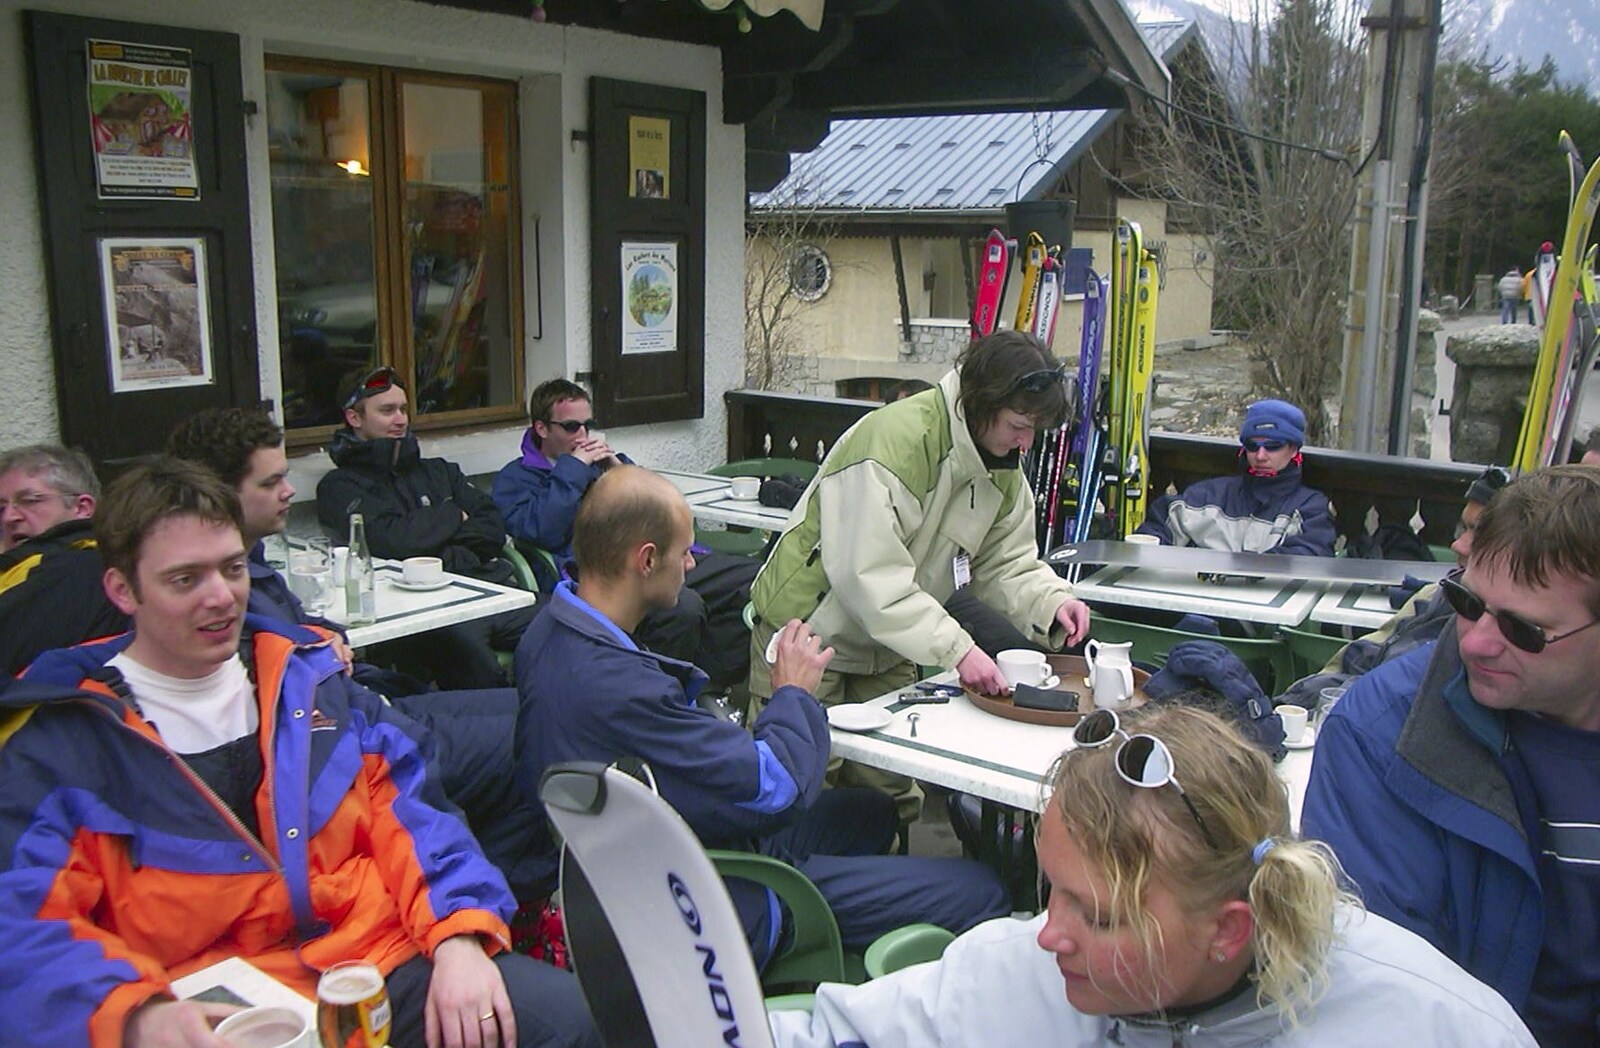 We find a café in town for lunch from 3G Lab Goes Skiing In Chamonix, France - 12th March 2002